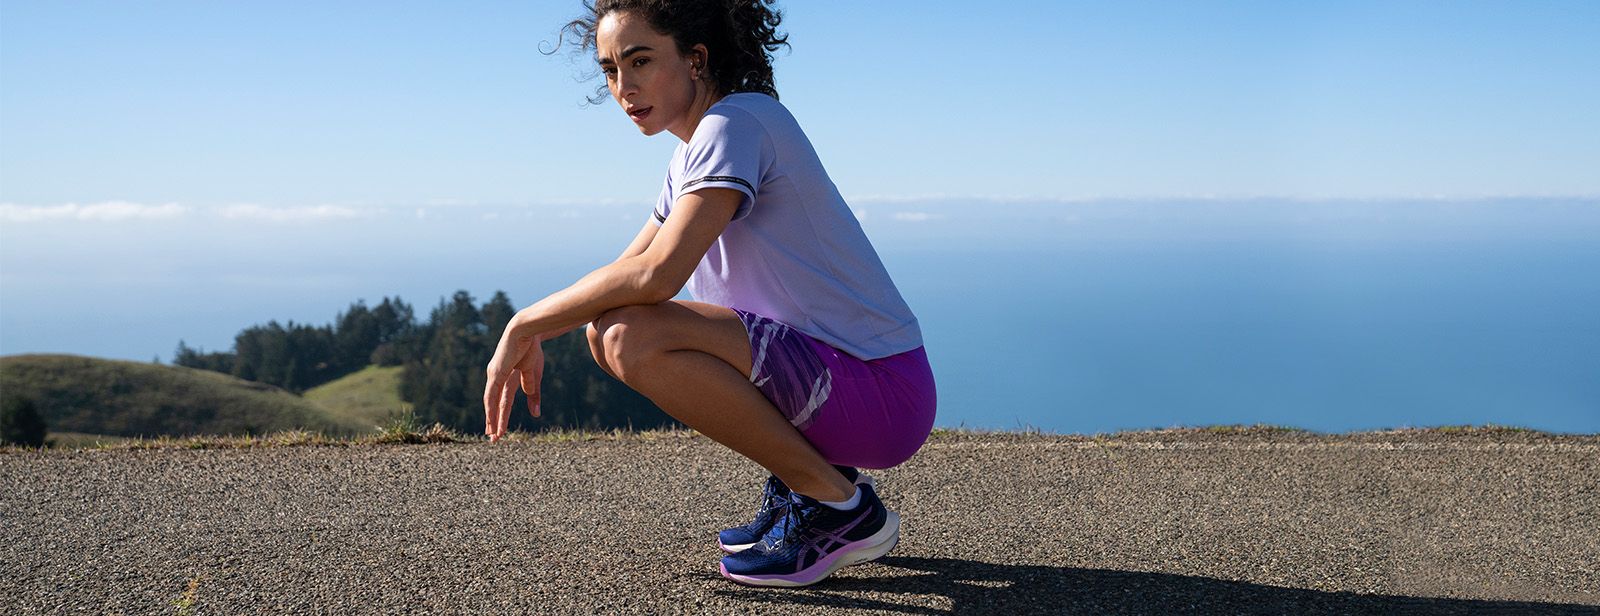 Woman resting after run on top of mountain top in ASICS clothing.